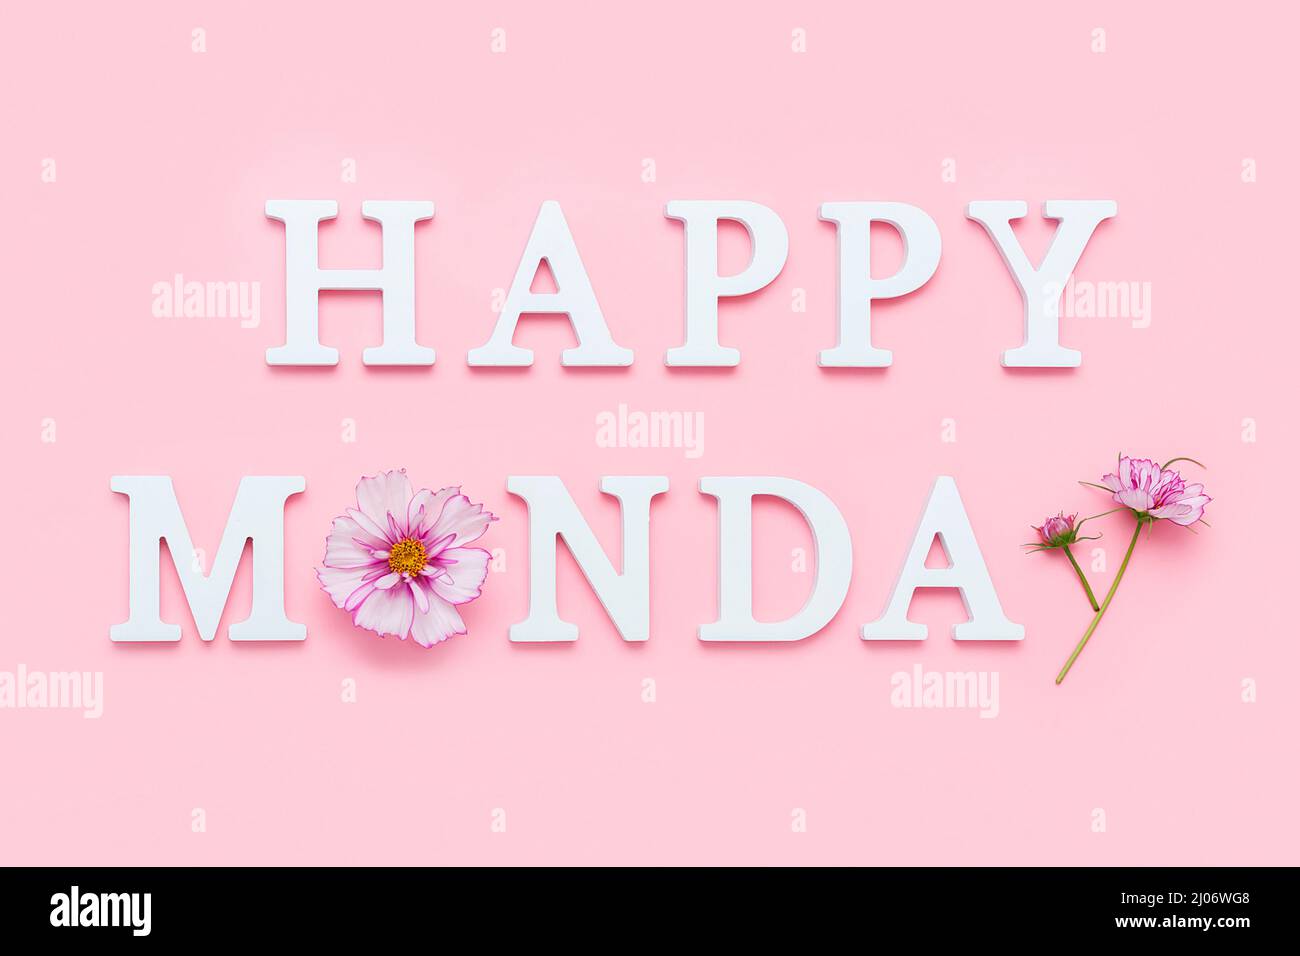 Happy Monday. Motivational quote from white letters and beauty natural flowers on pink background. Creative concept Hello Monday, positive mood. Stock Photo